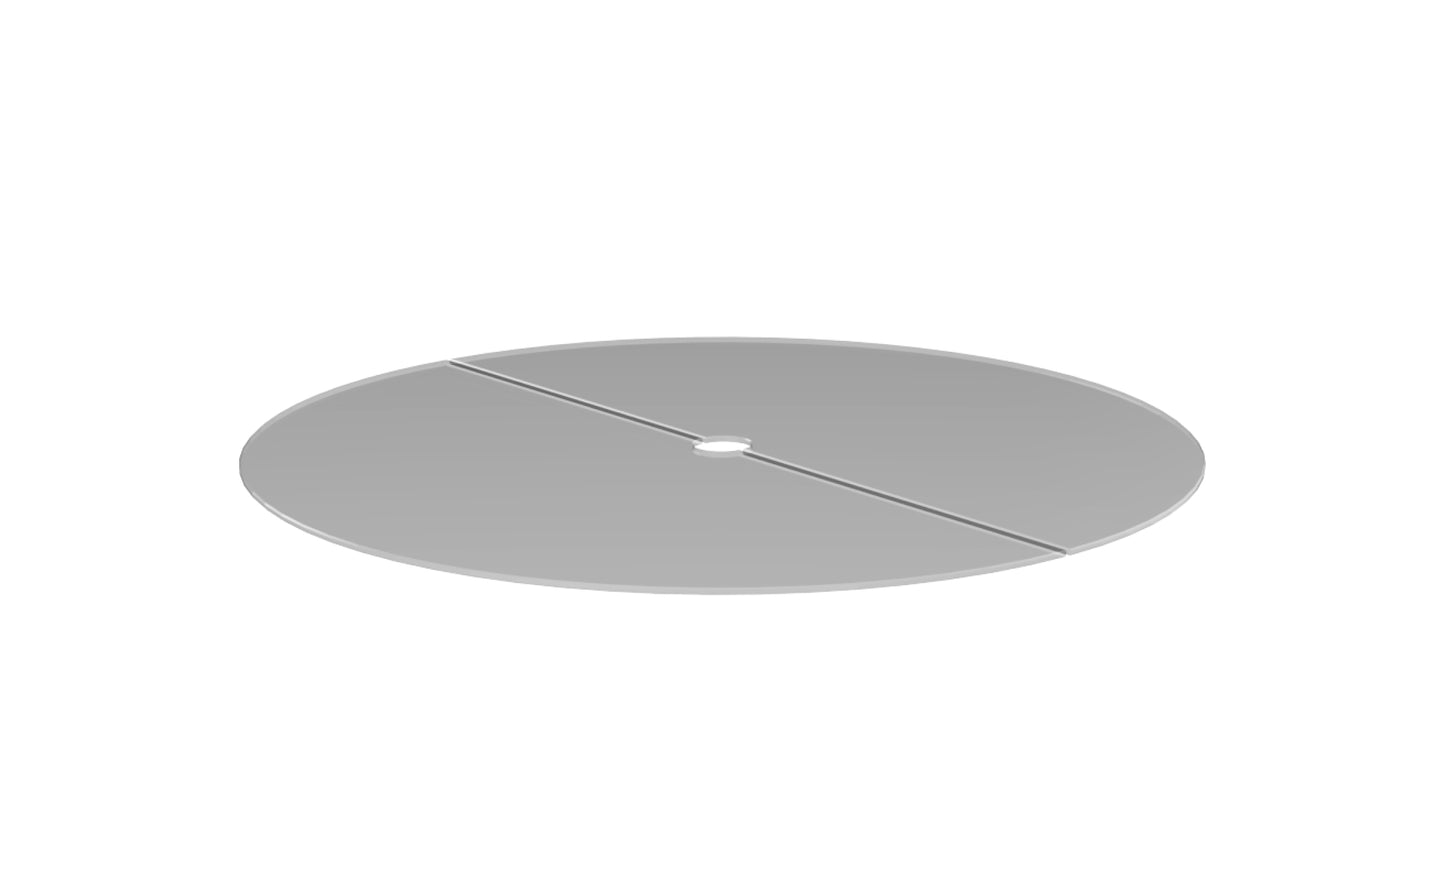 Ecosmart Glass Cover Plate R20